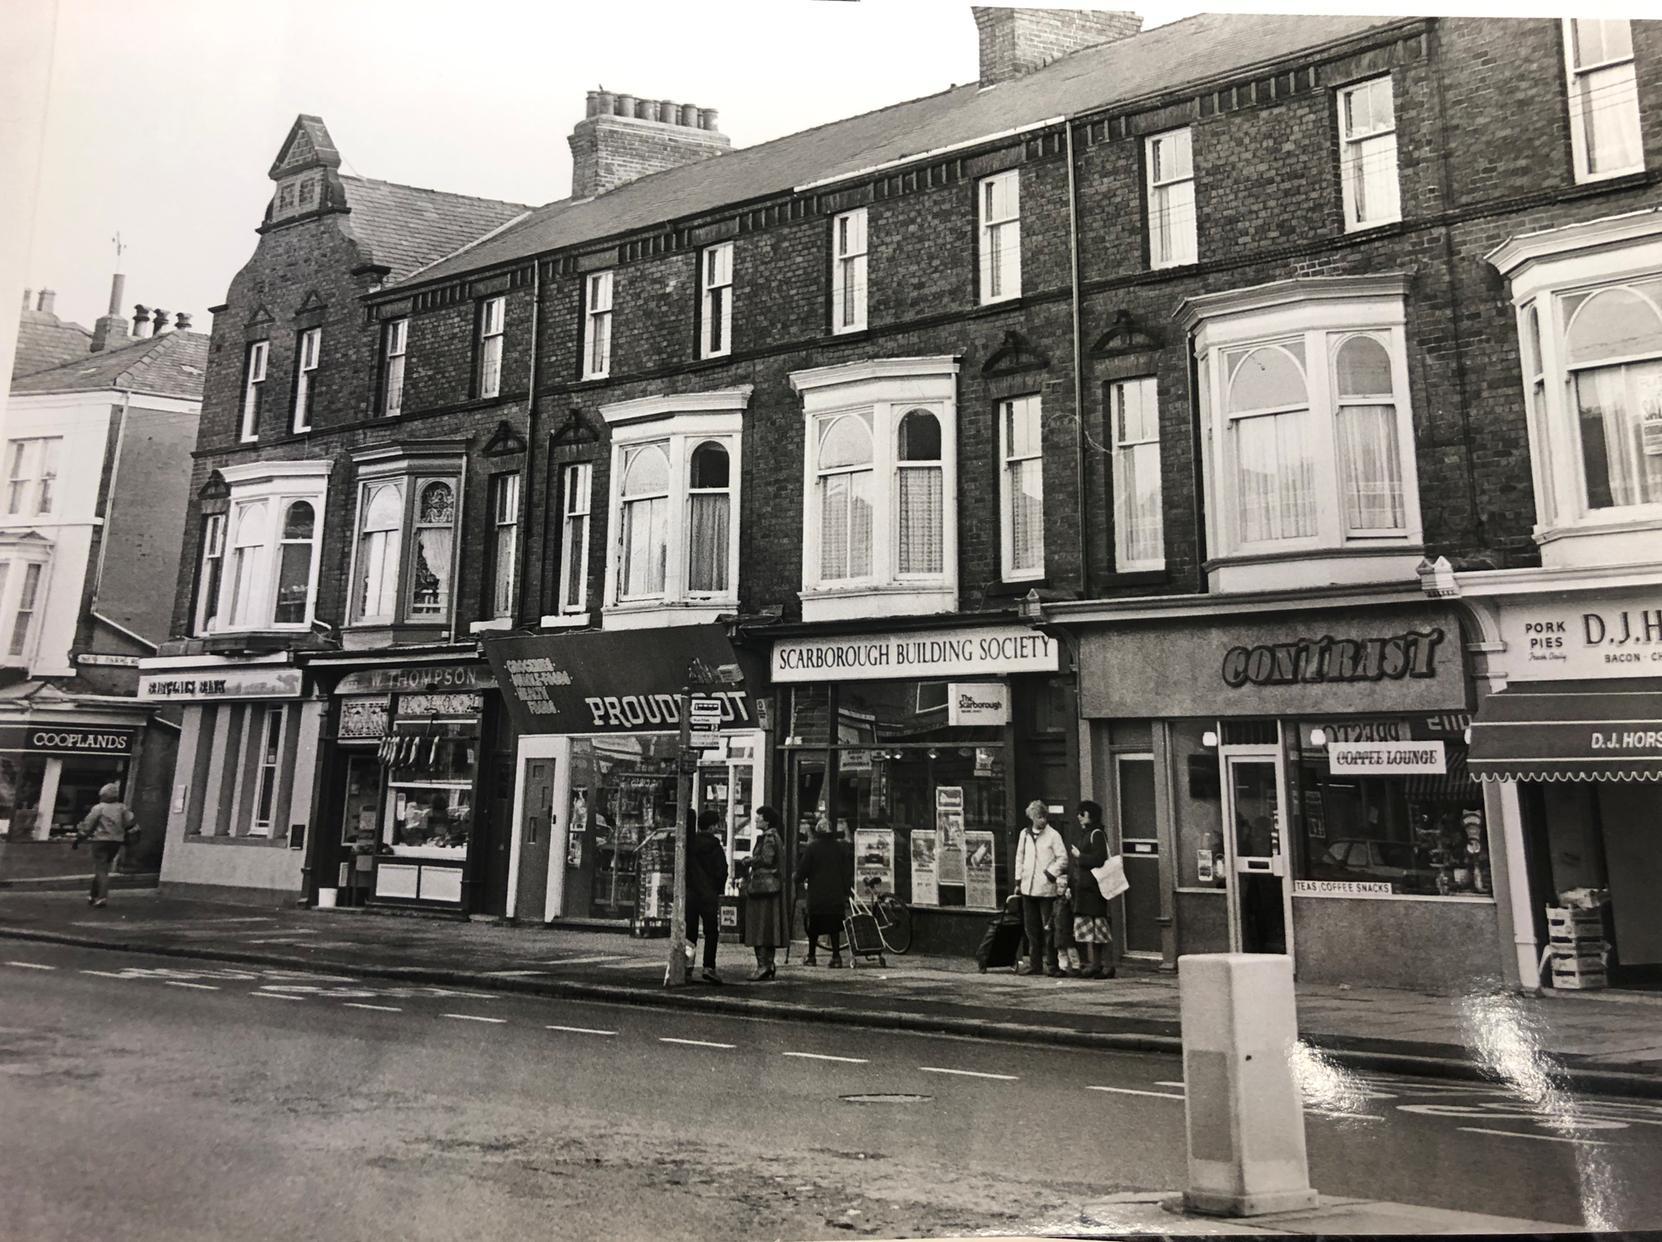 The two buildings tot he left of Scarborough Building Society are now Pattison's fruit and flower shop. Contrast Cafe is still there and the building society is now the Firk Inn.